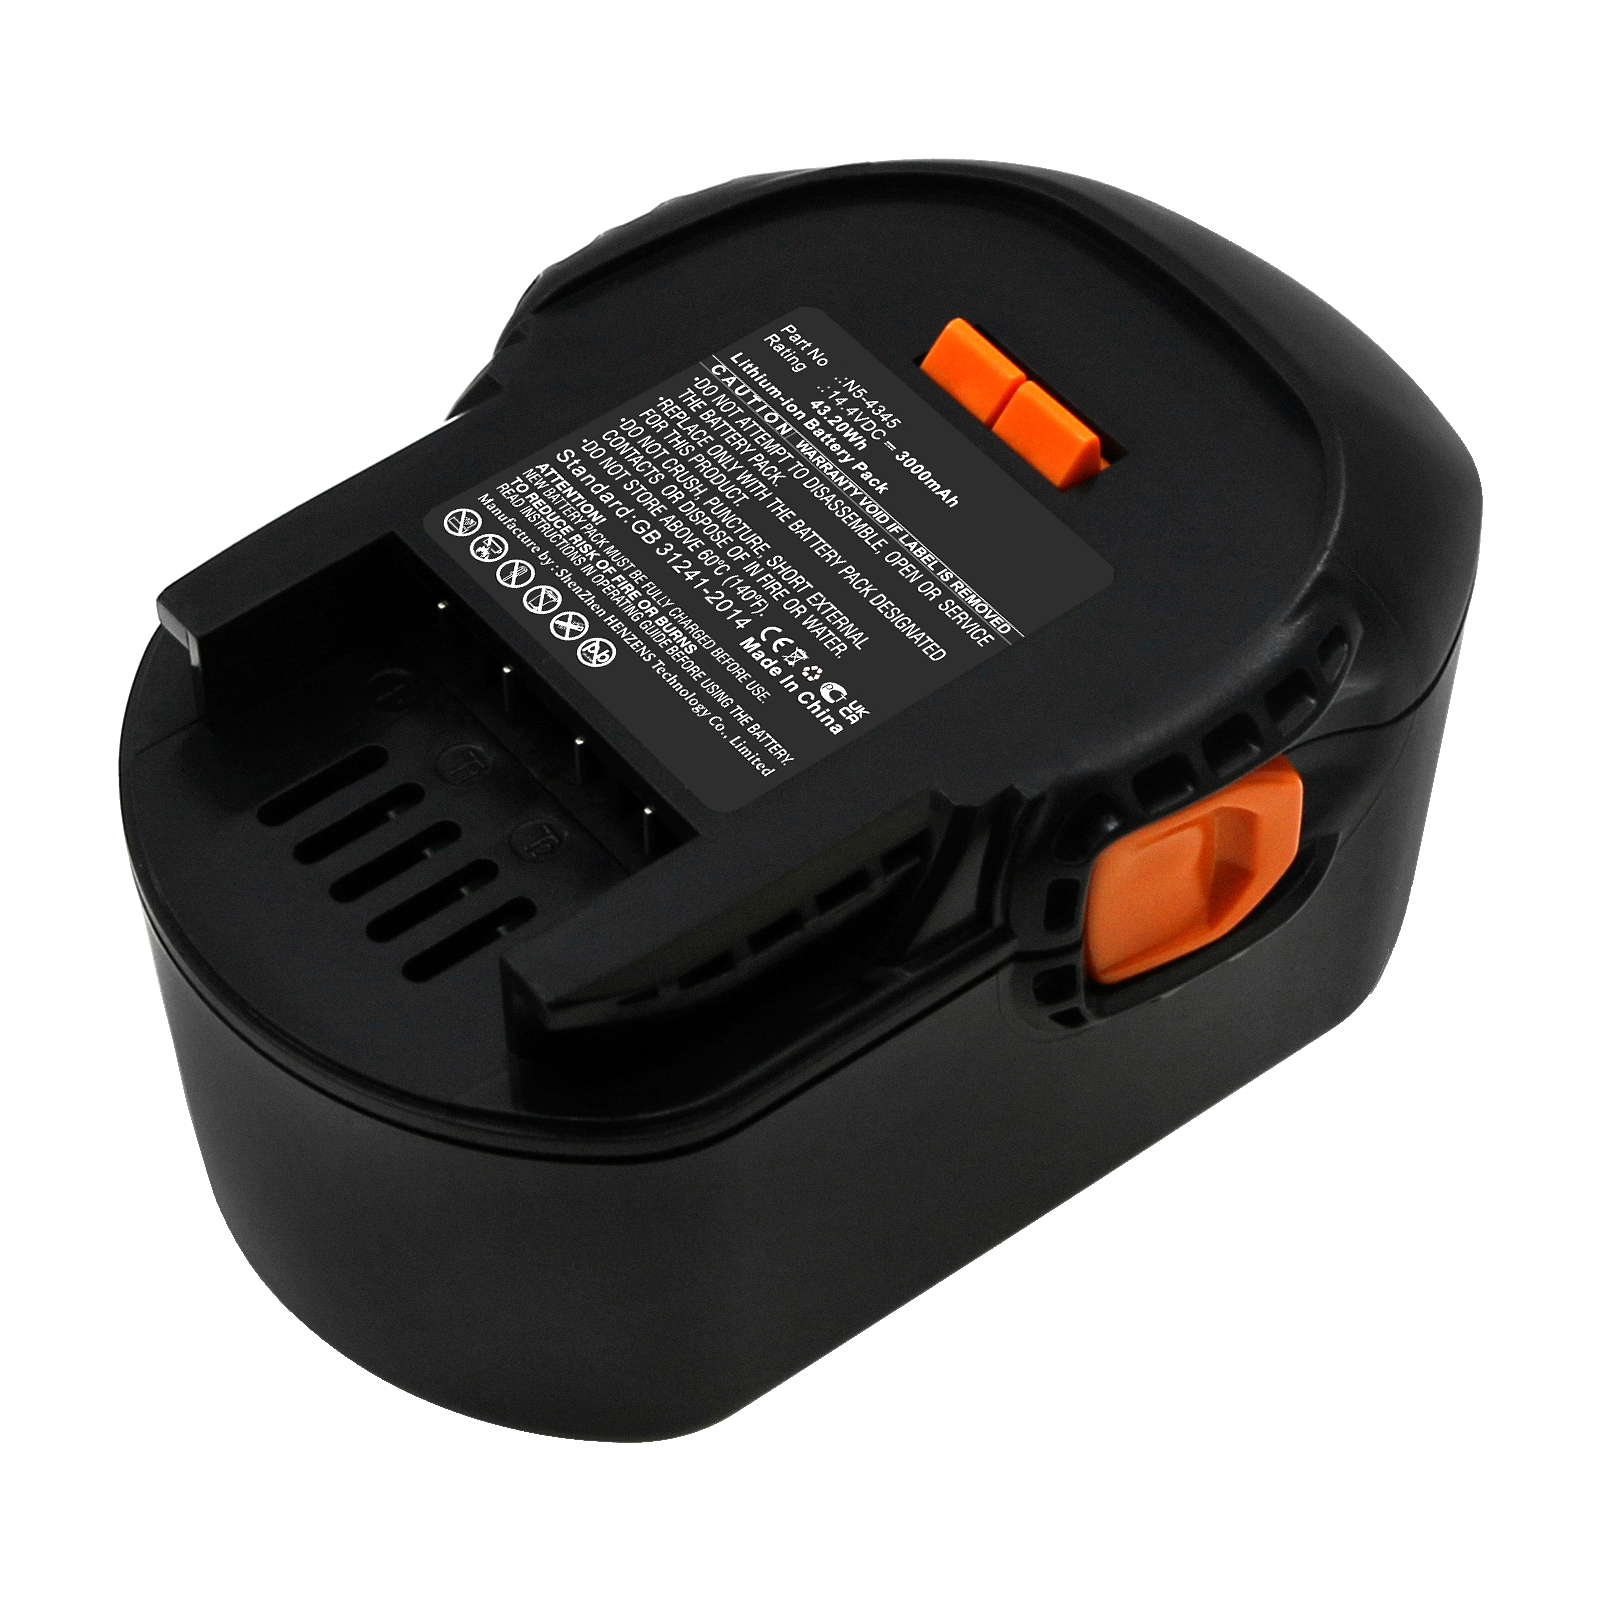 Synergy Digital Strapping Tools Battery, Compatible with Fromm N5-4345 Strapping Tools Battery (Li-ion, 14.4V, 3000mAh)